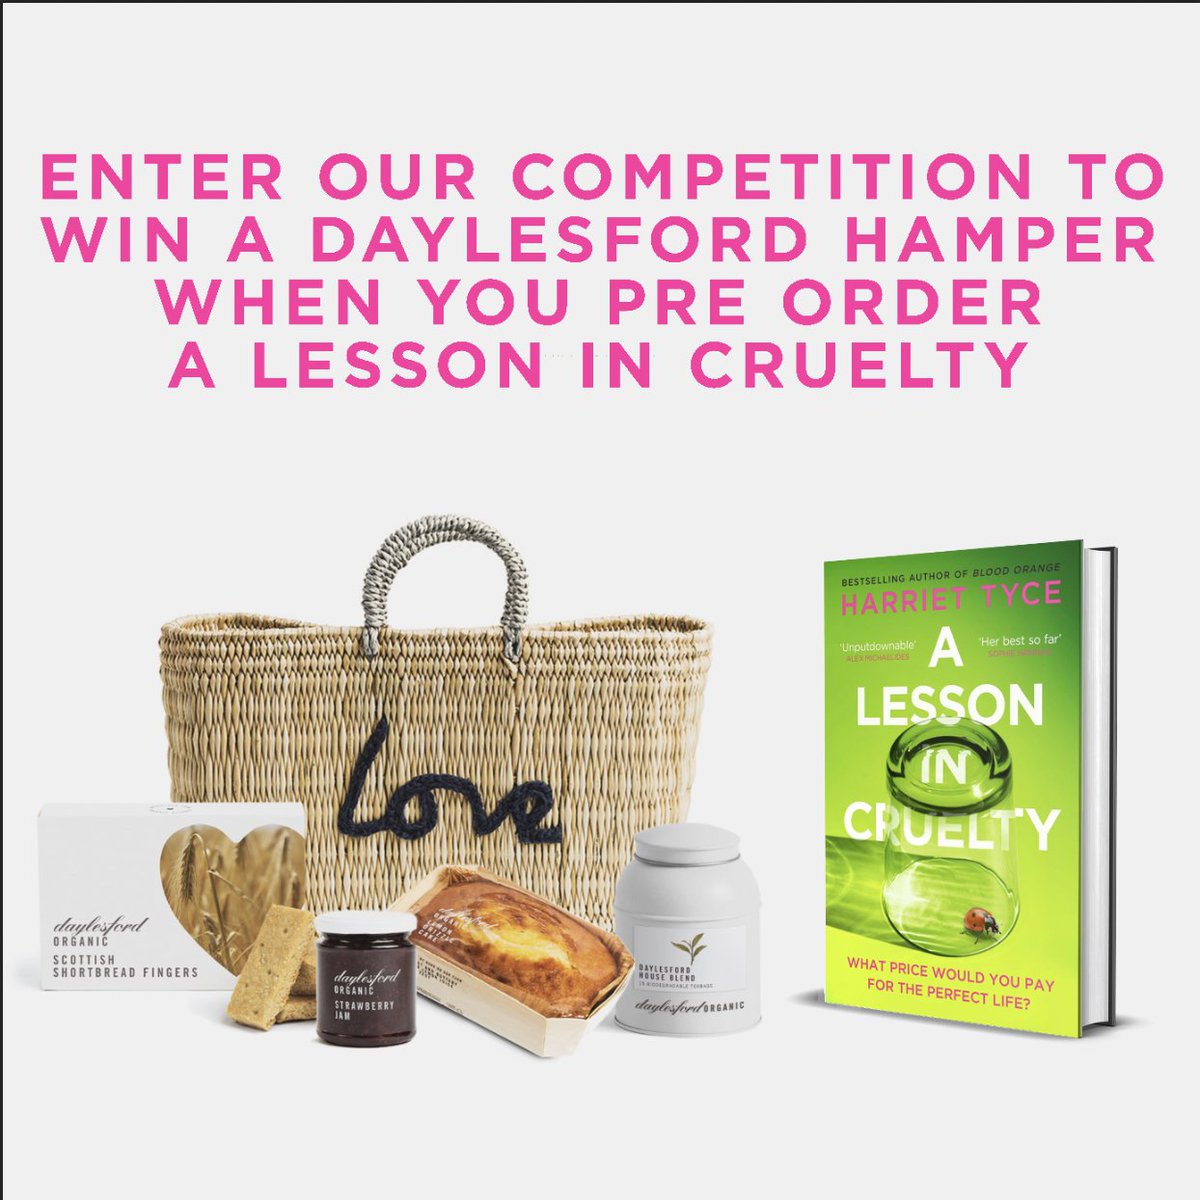 We LOVE a #competition! To celebrate @harriet_tyce's A LESSON IN CRUELTY publishing this 11th April, submit your proof of pre order (in any format) below to be in with a chance of winning a Daylesford Hamper worth over £150! @Wildfirebks 🐞🐞🐞 headline.co.uk/landing-page/a…